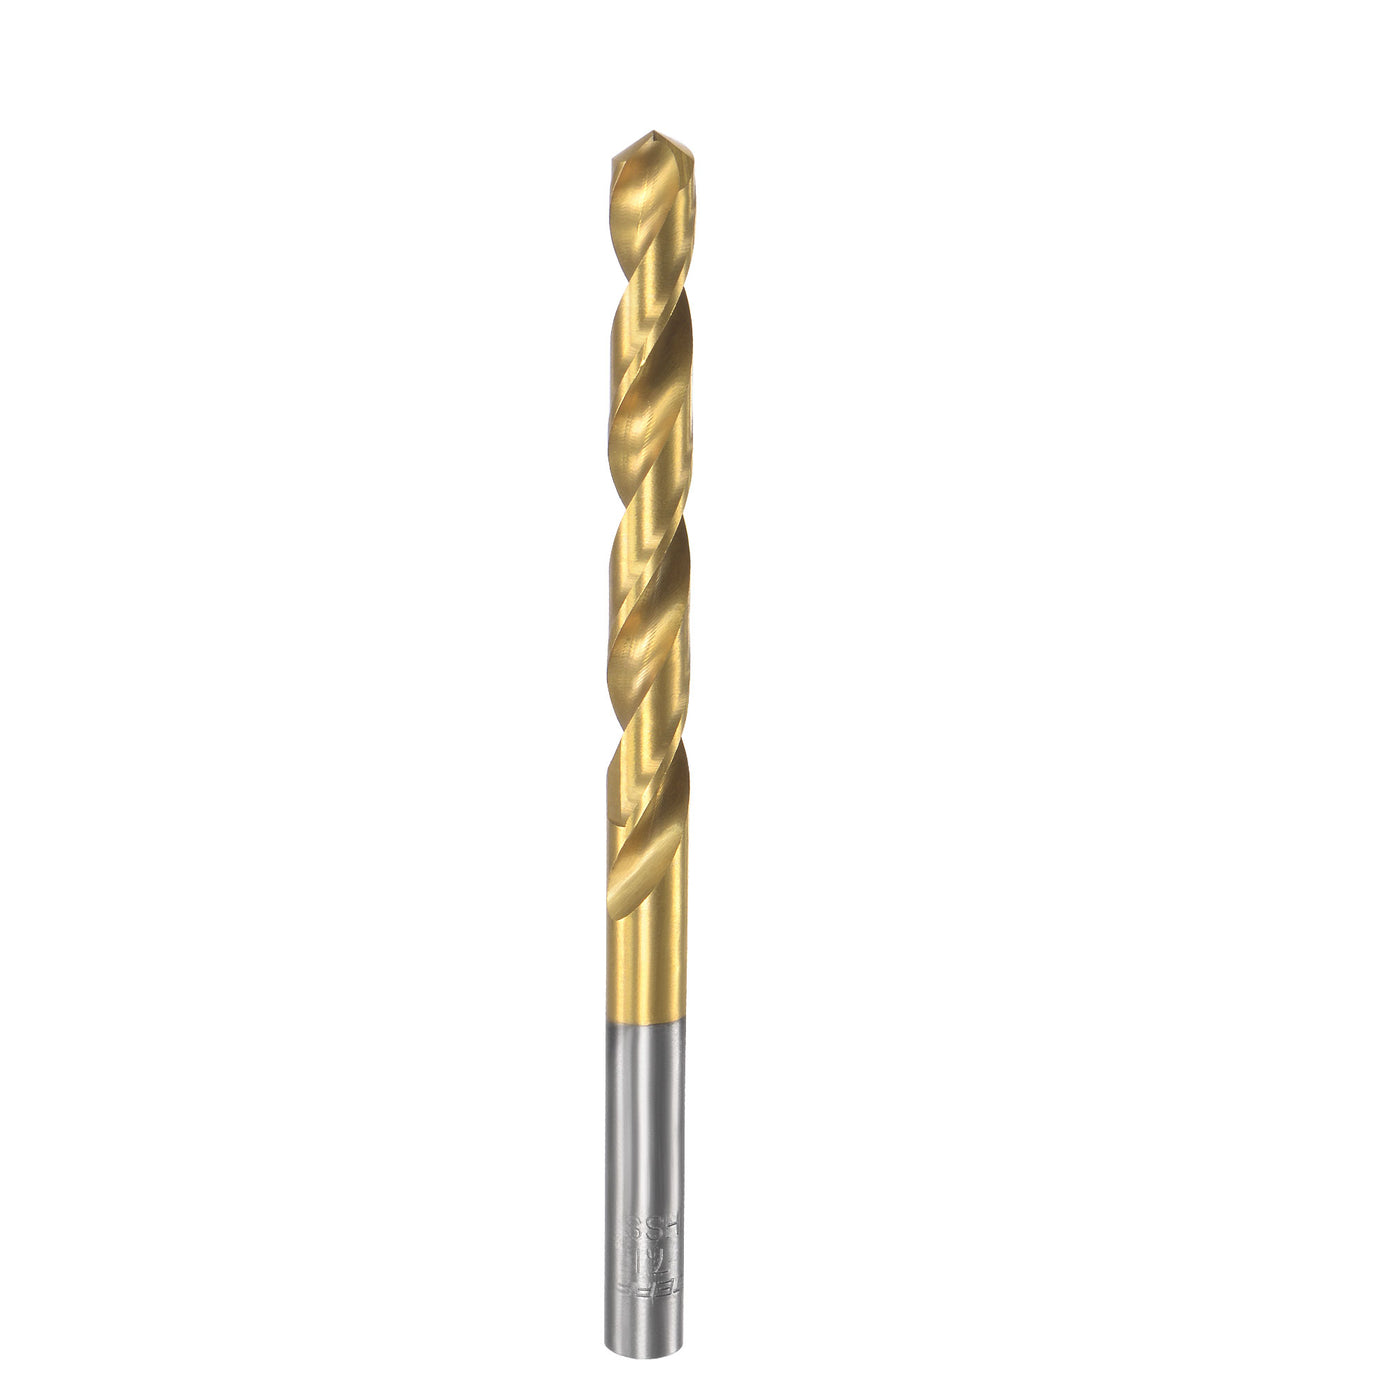 uxcell Uxcell High Speed Steel Twist Drill Bit 7.1mm Fully Ground Titanium Coated